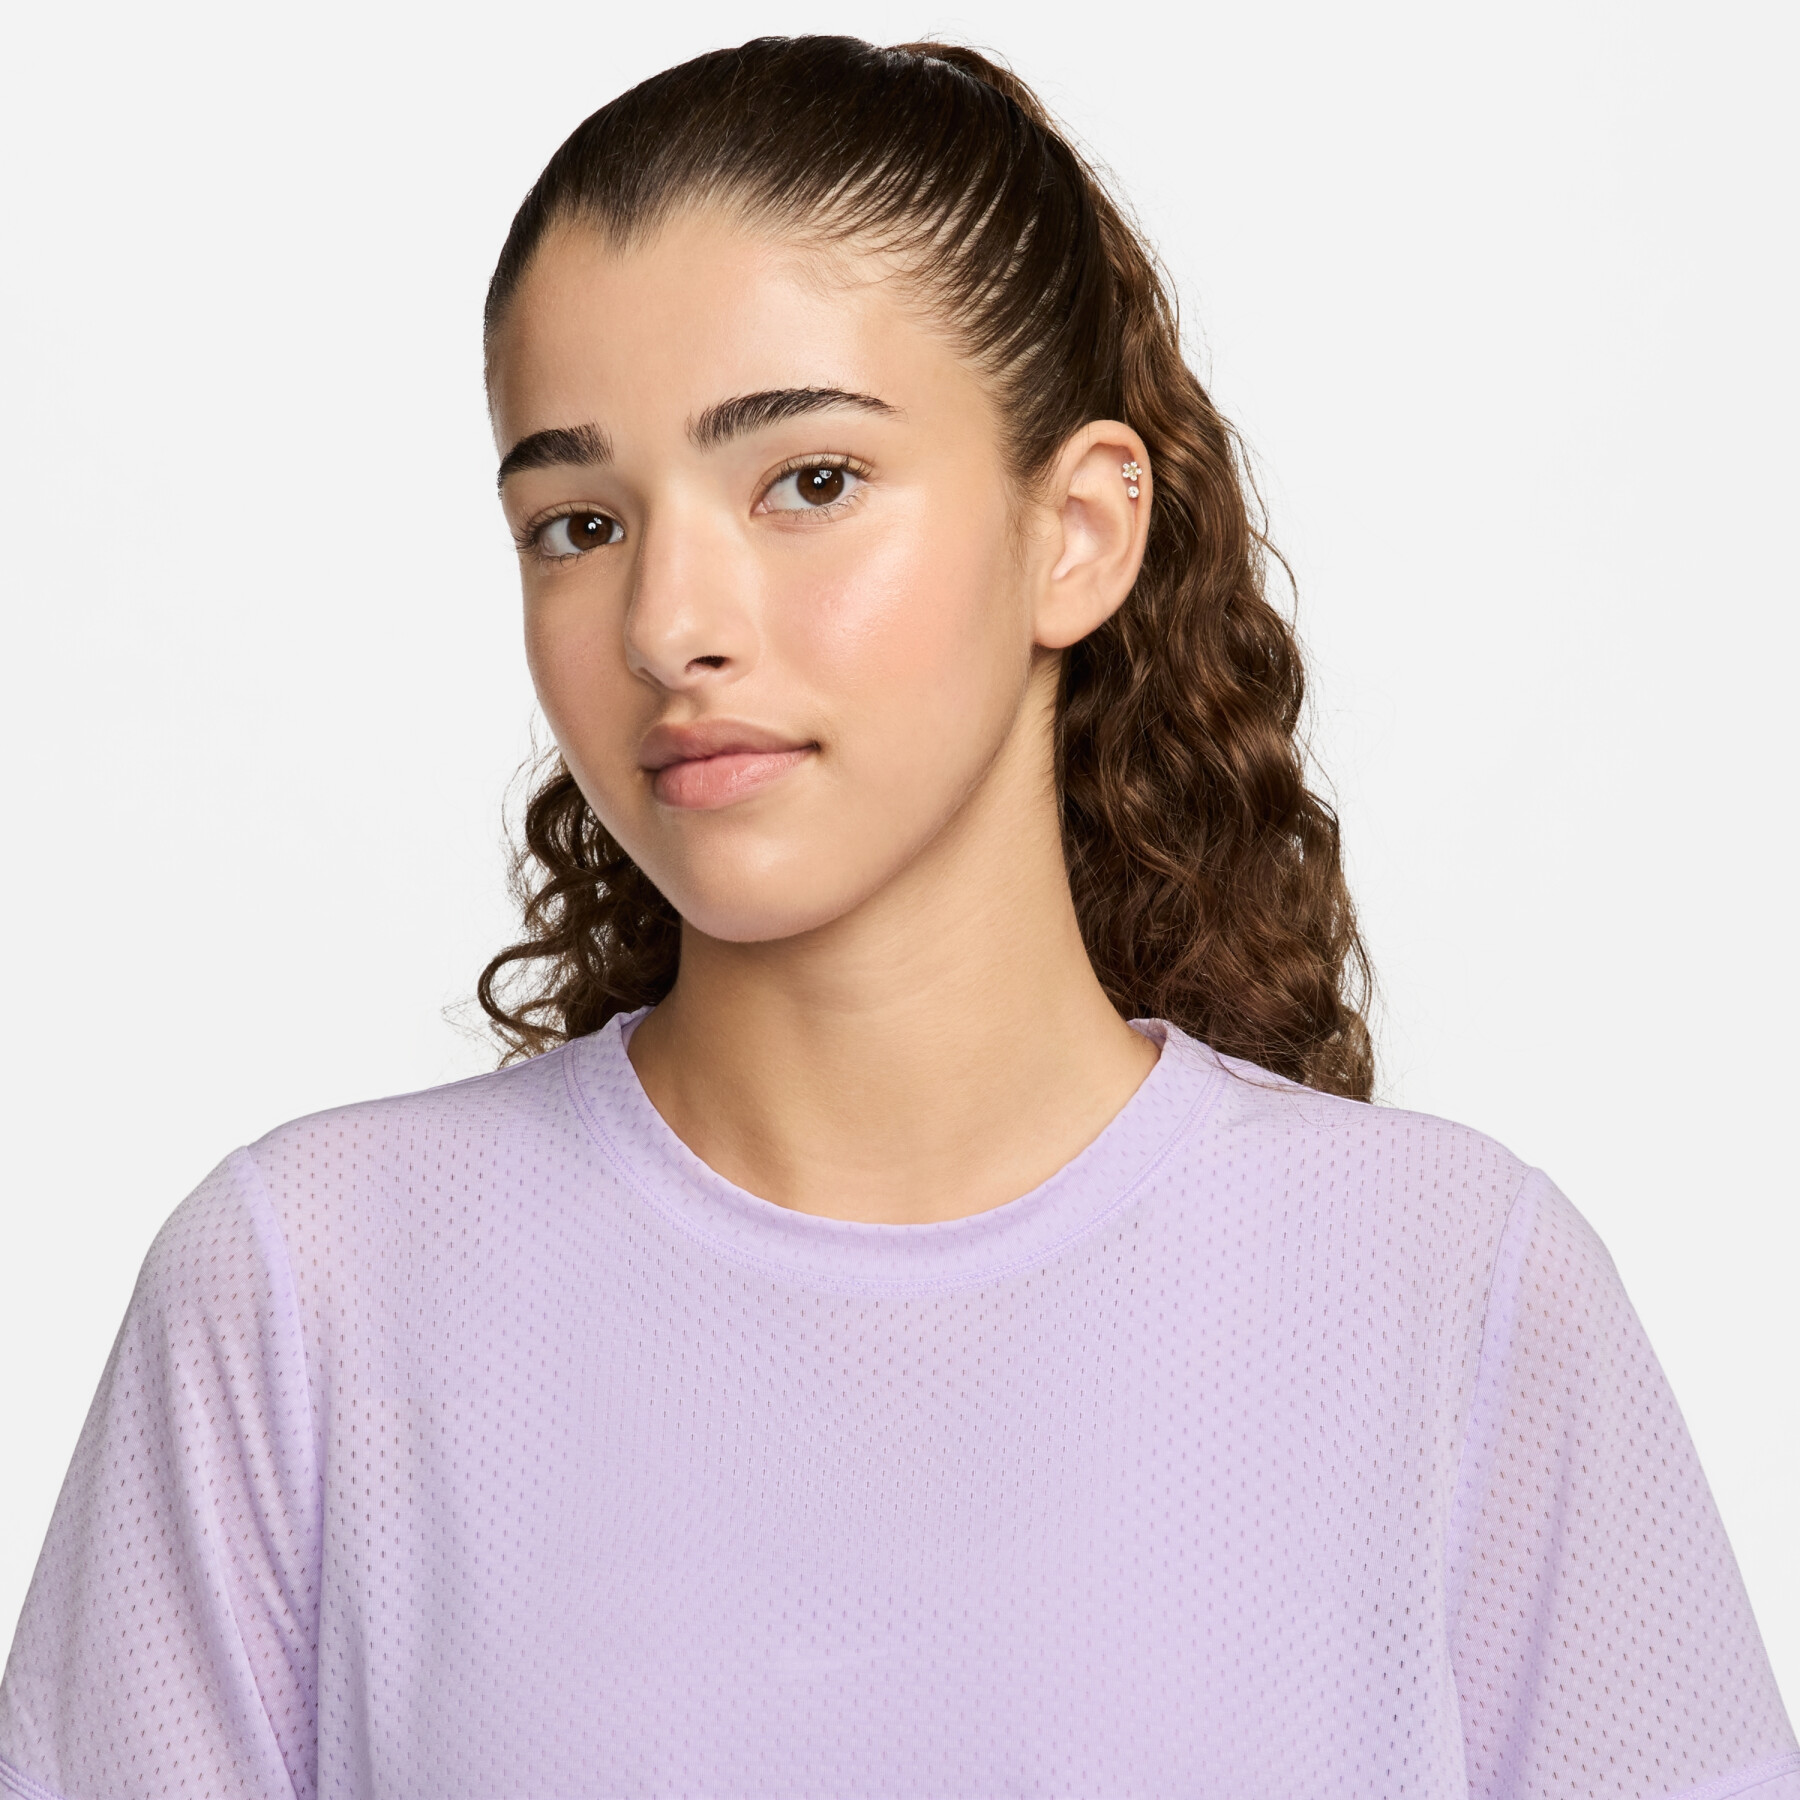 Camiseta cropped mujer Nike One Classic Breathable